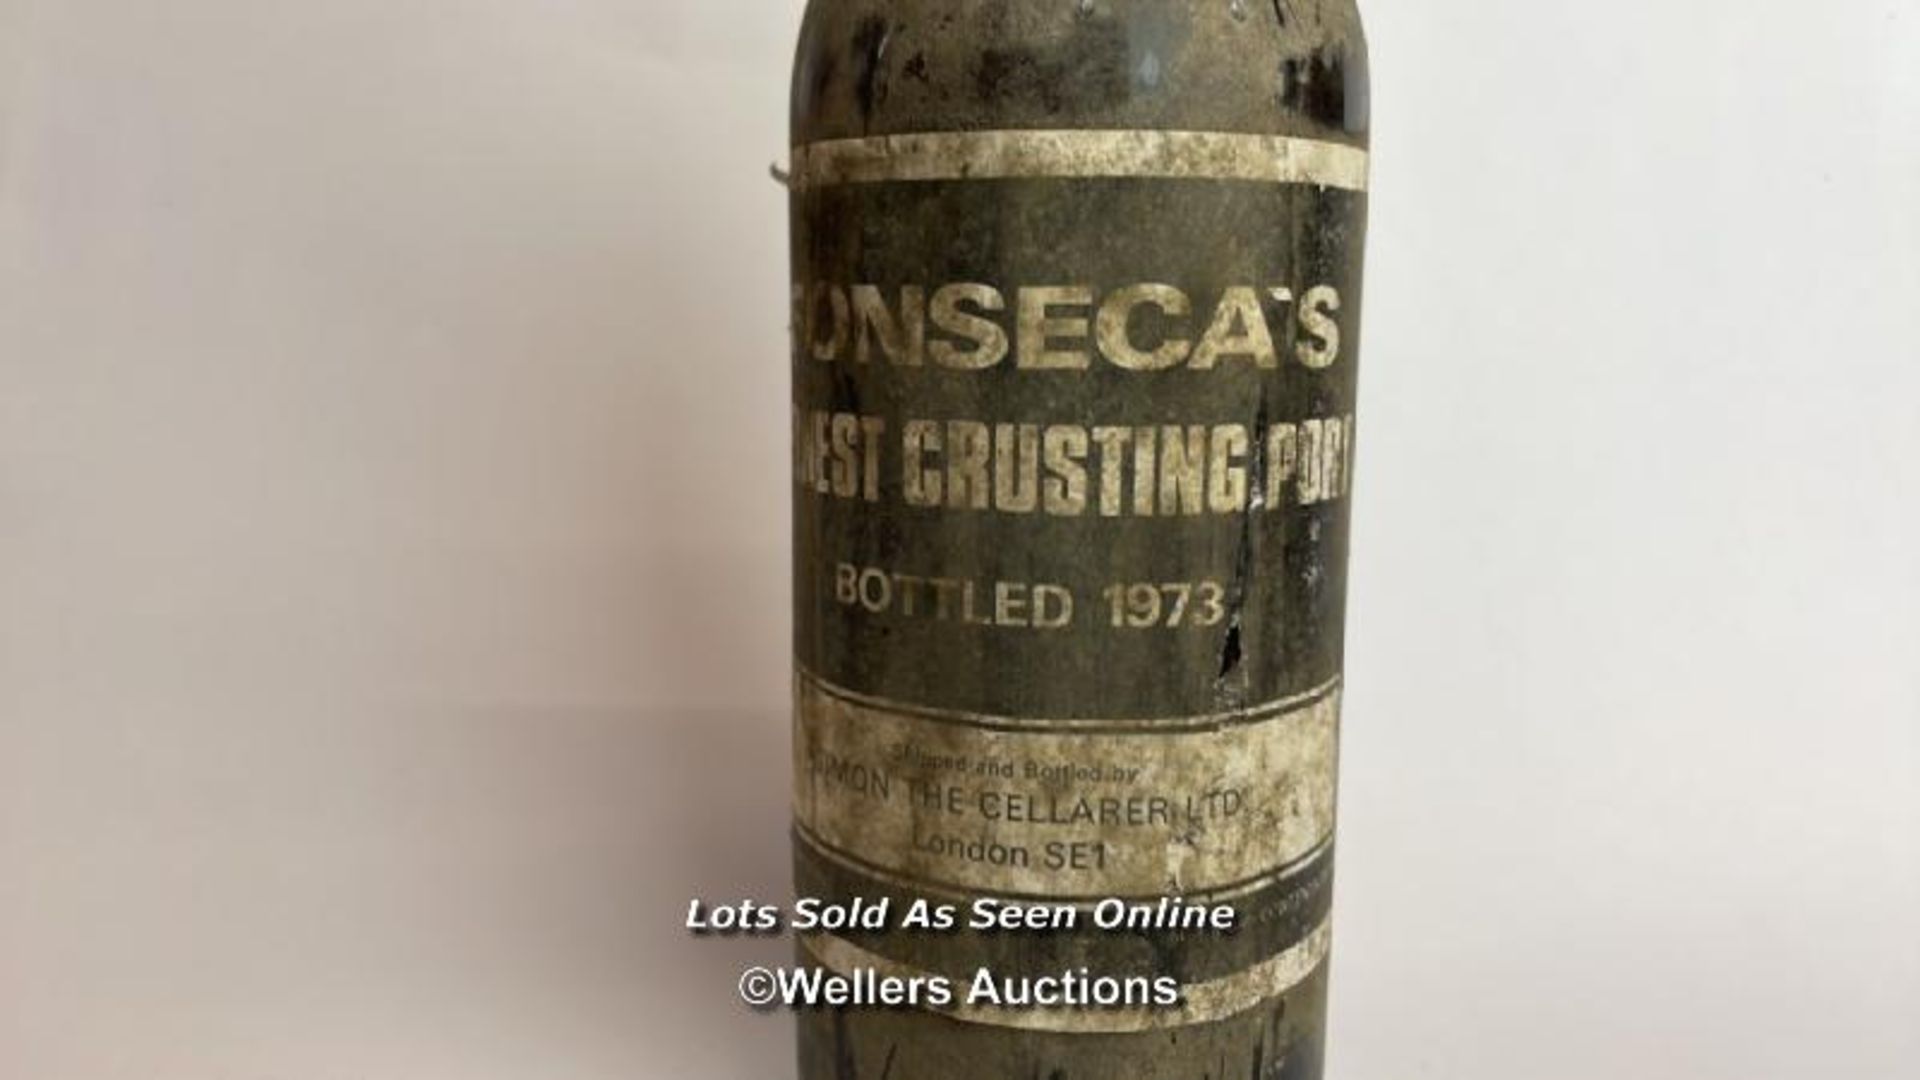 1973 Fonesca's Finest Crusting Port, 26 fl oz / Please see images for fill level and general - Image 2 of 6